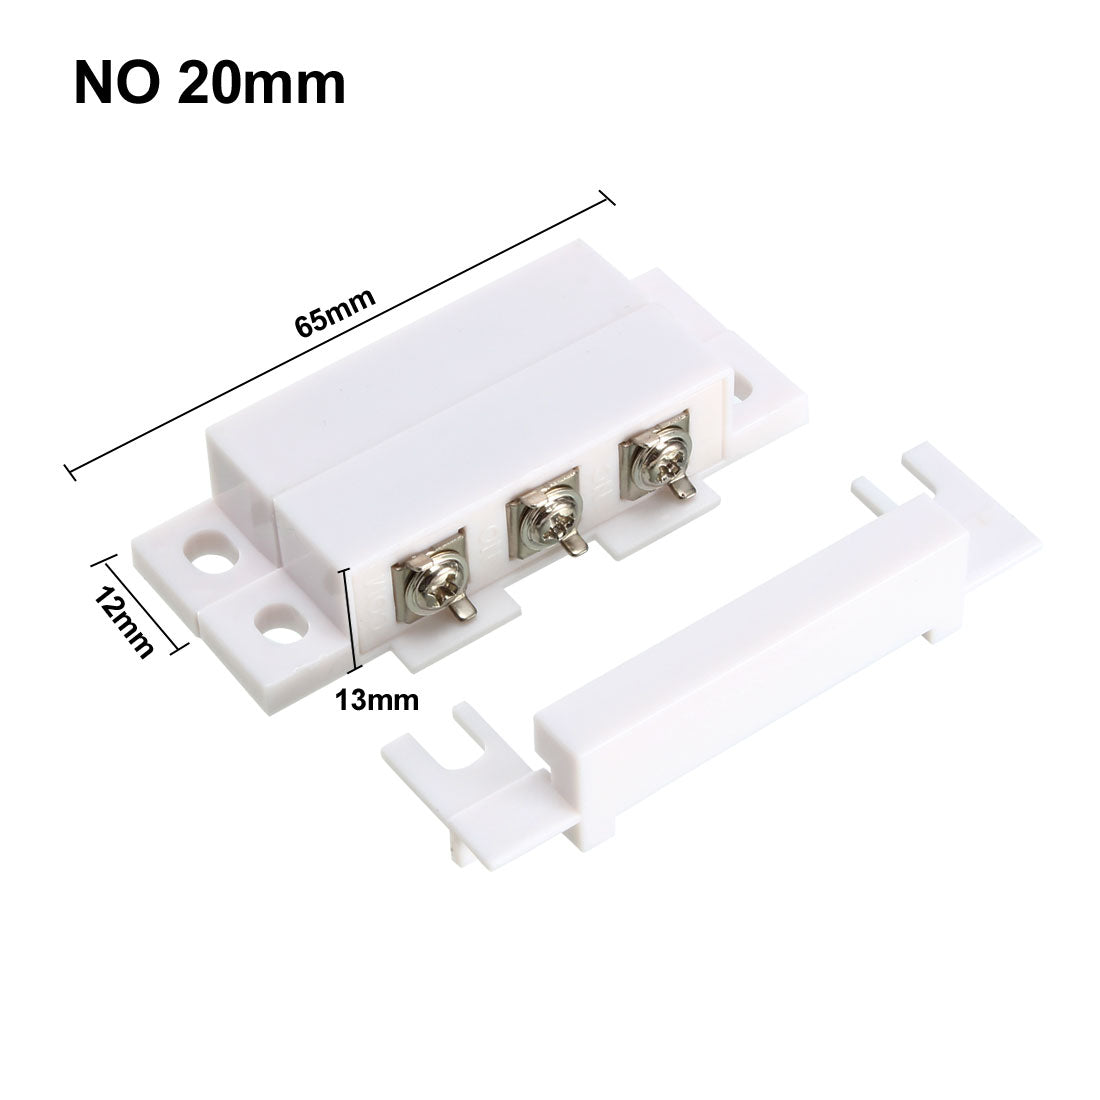 uxcell Uxcell 3pcs MC-31 Surface Mount Wired NO+NC Door Contact Sensor Alarm Magnetic Reed Switch White